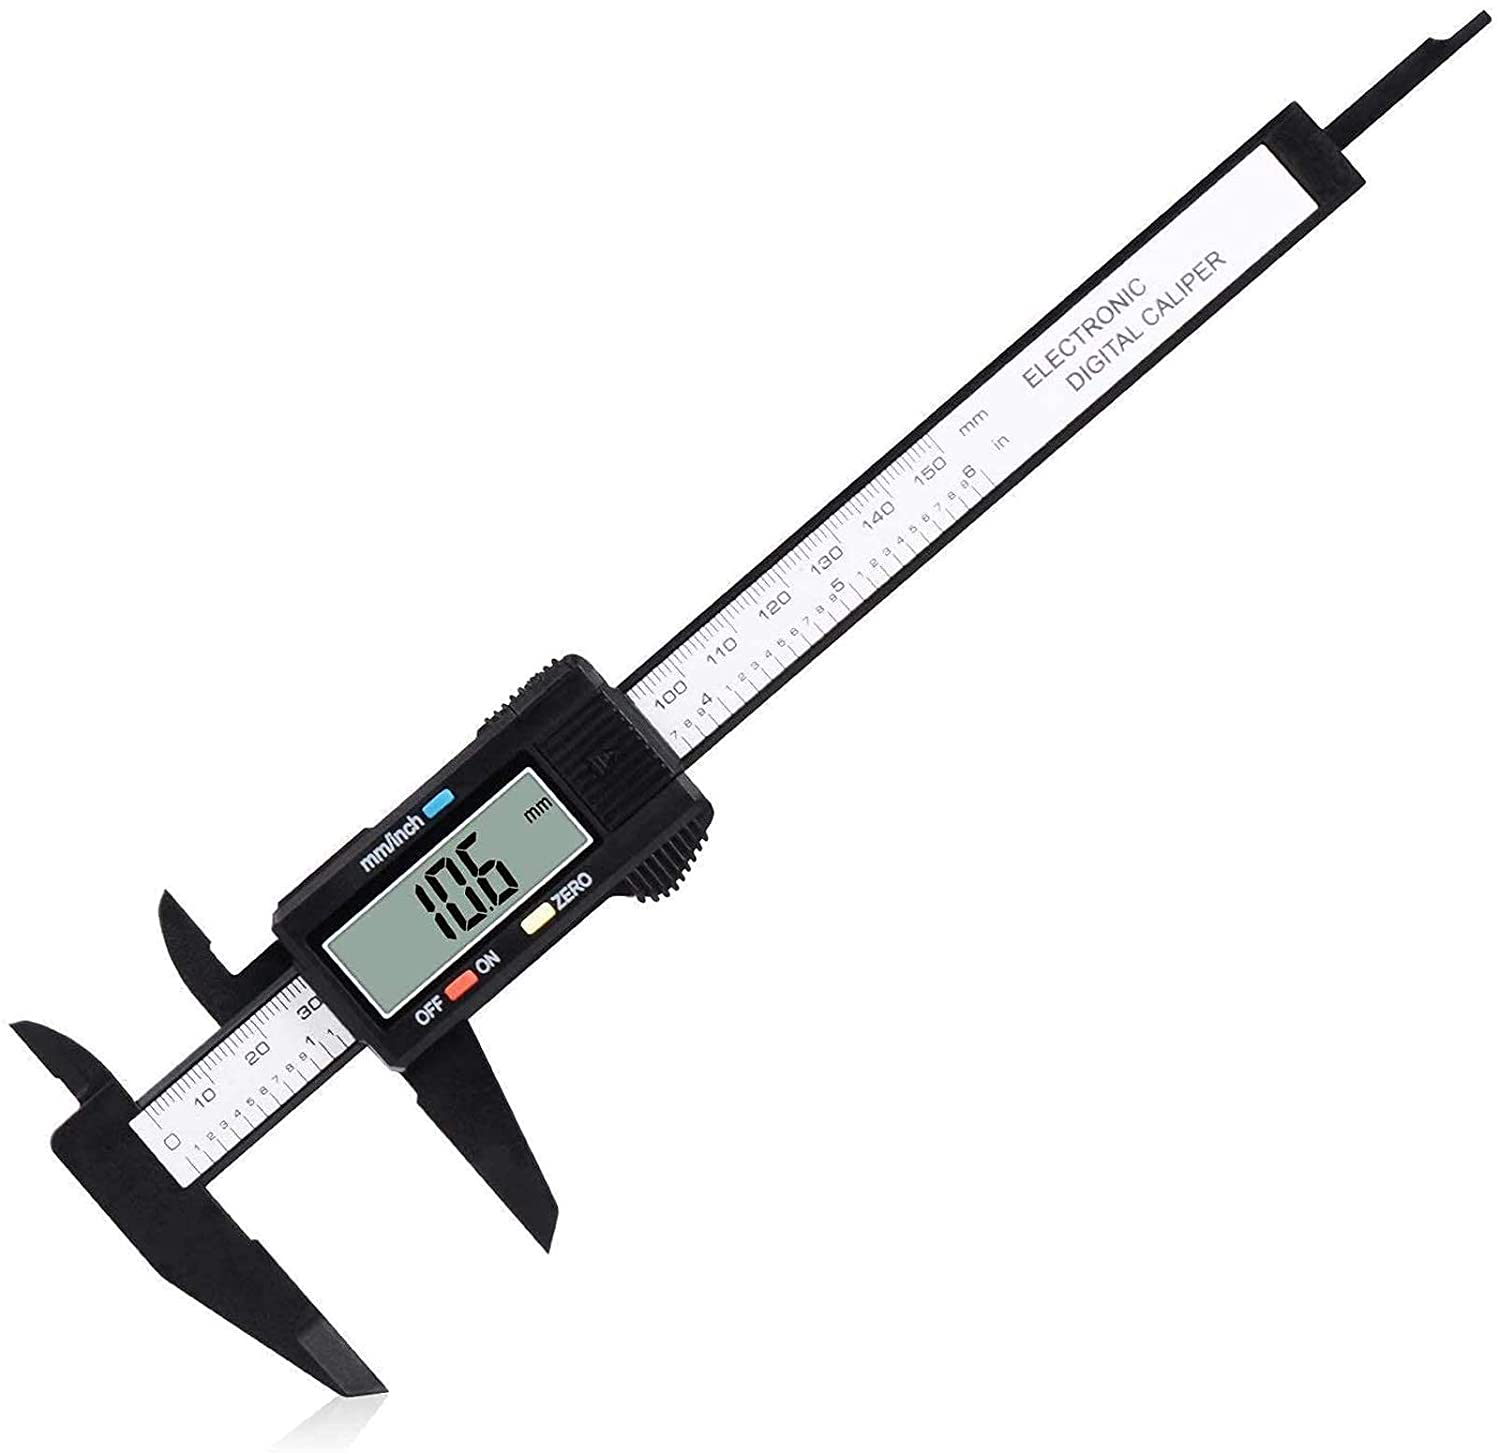 Digital Caliper, 6" Caliper Measuring Tool Extreme Accuracy Waterproof Electronic Vernier Caliper Industrial Stainless Steel Digital, Durable Measuring Tool with Large LCD Screen